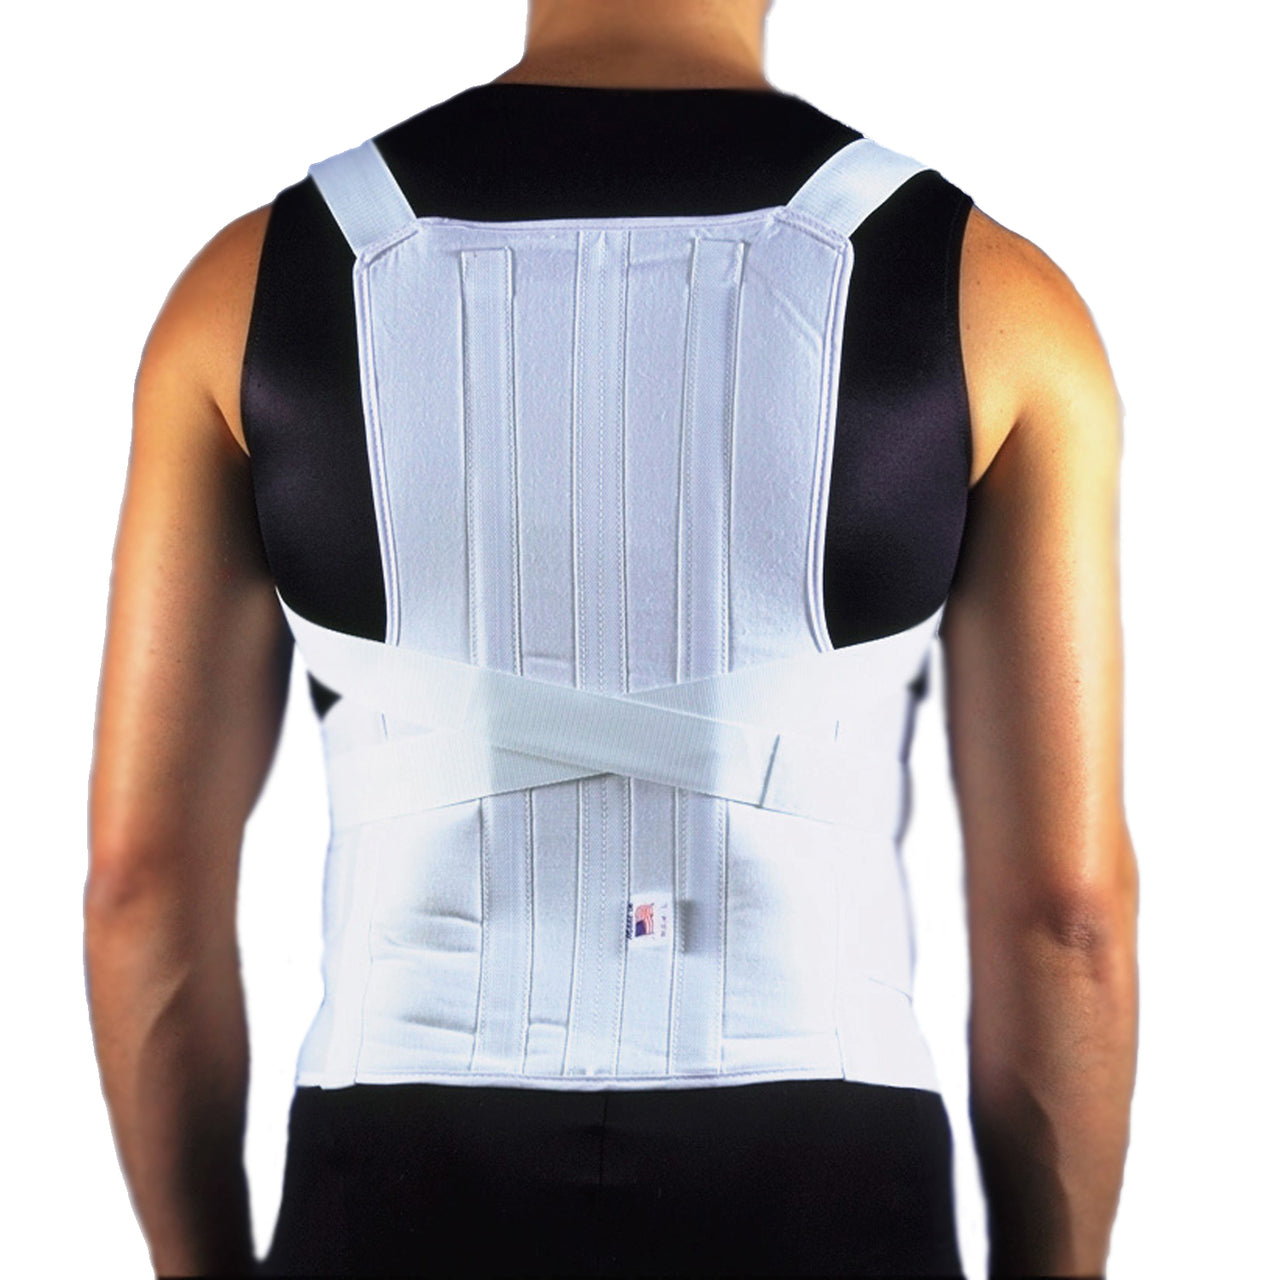 ITA-MED Breathable Duo-Adjustable Back Support with Back Pocket